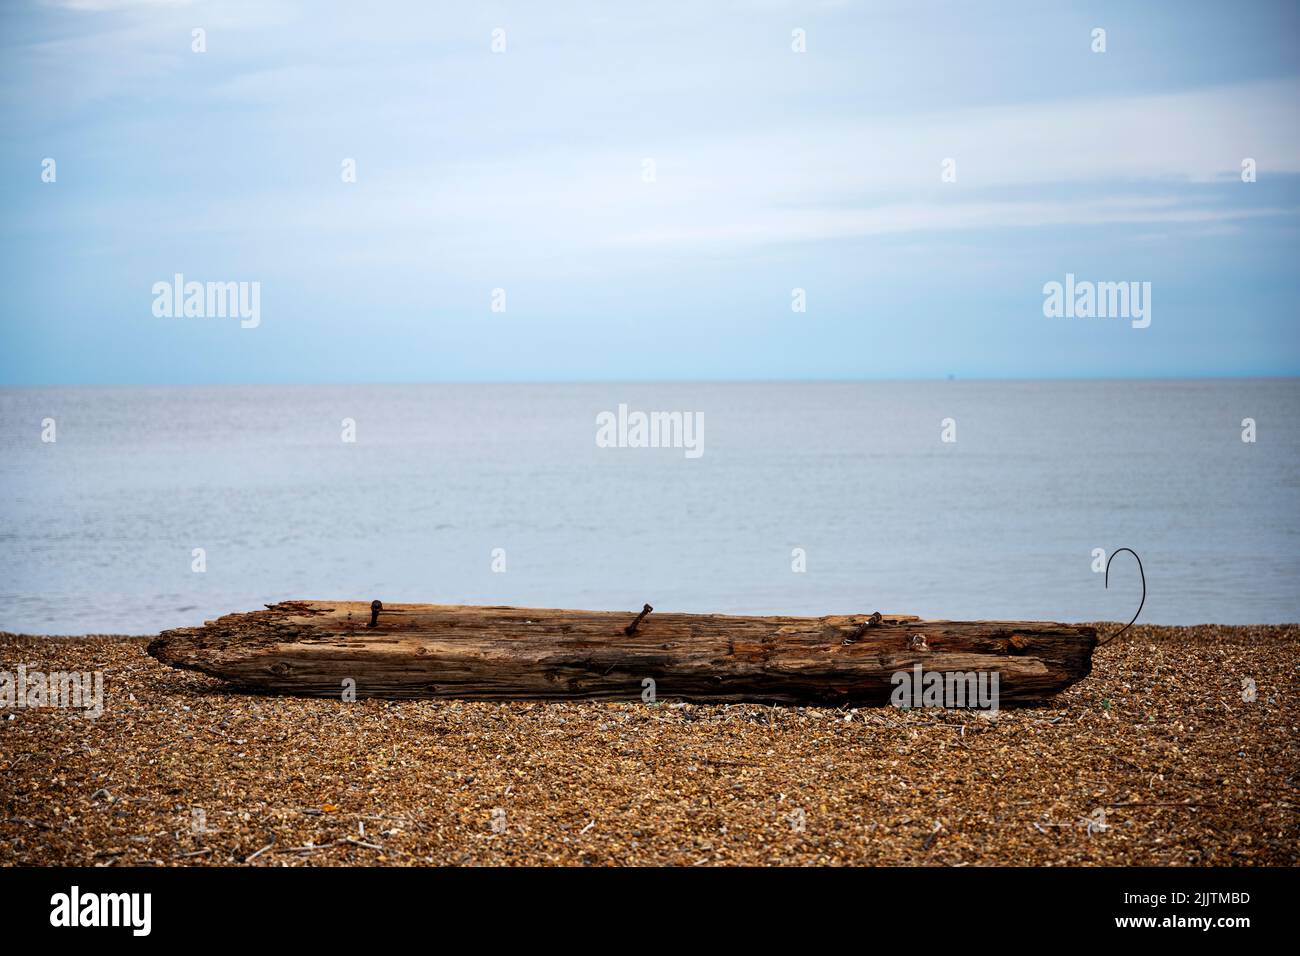 !40-year old wooden groyne or breakwater washed up on the beach due to coastal erosion, Bawdsey Ferry, Suffolk, UK. Stock Photo